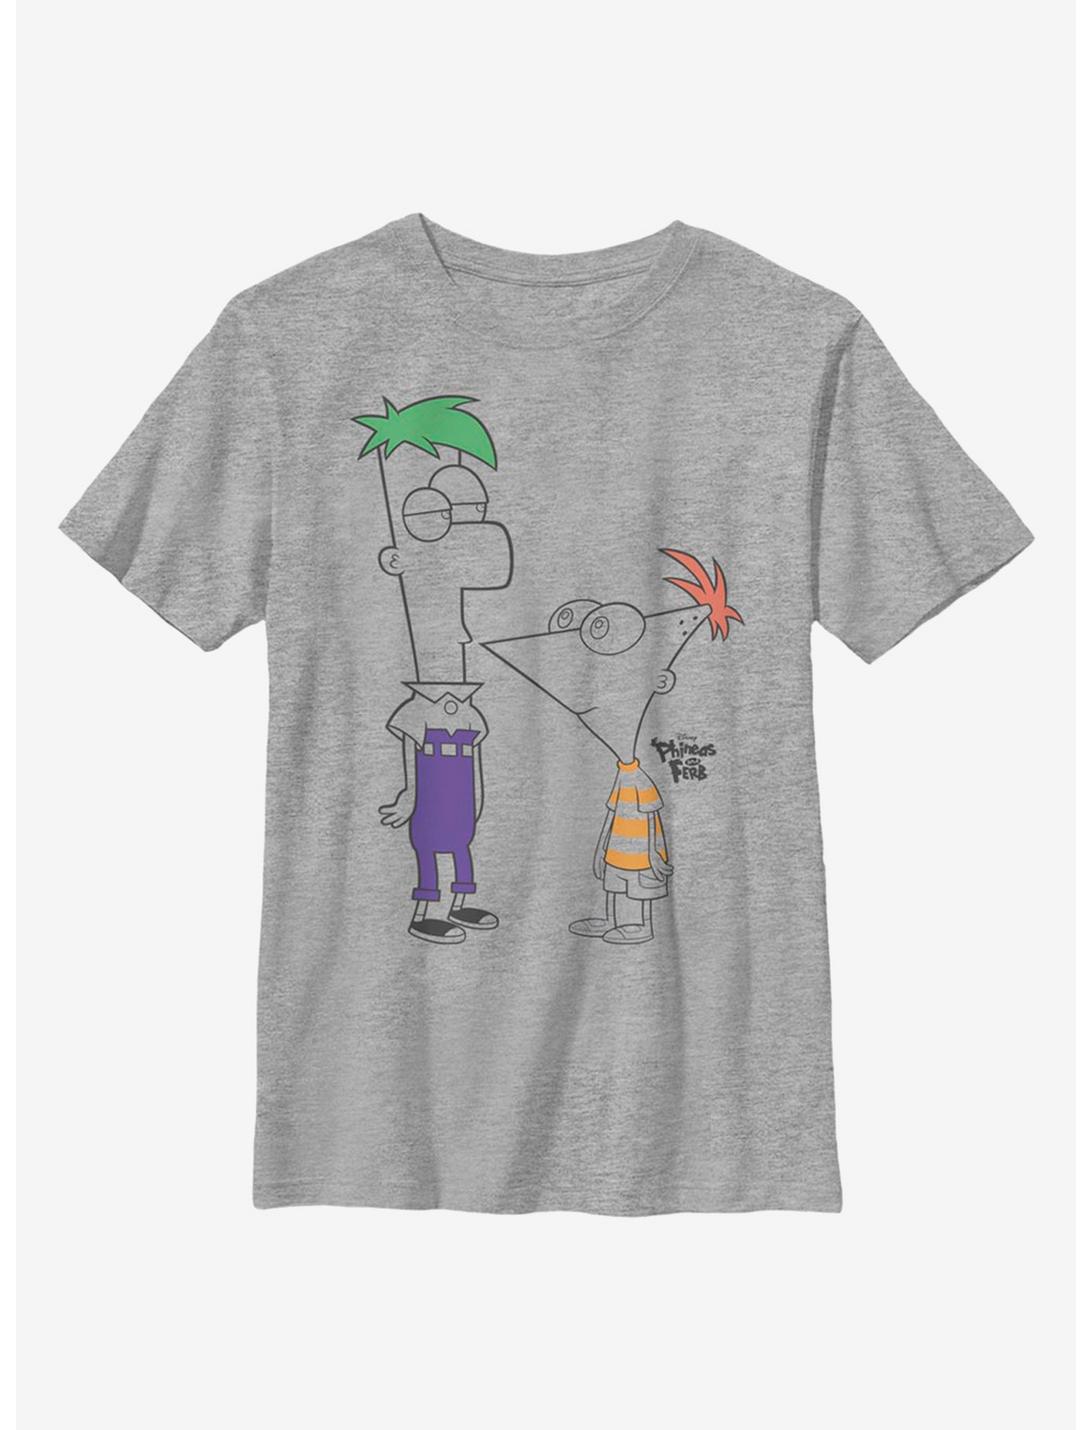 Disney Phineas And Ferb Boys Of Summer Youth T-Shirt, ATH HTR, hi-res